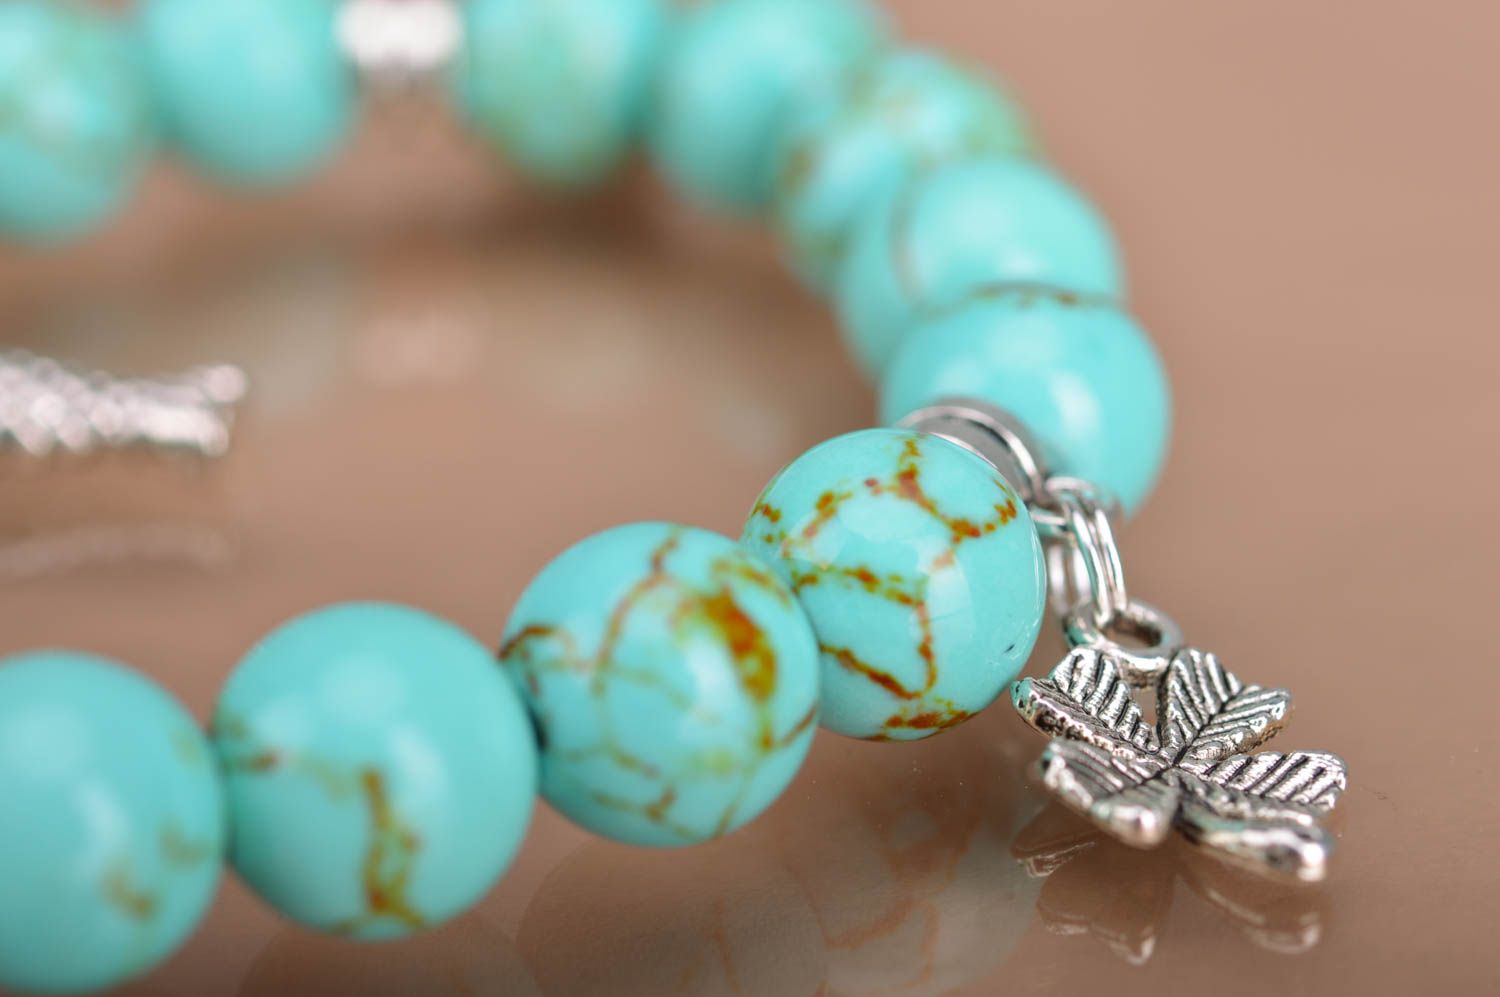 Handmade beaded wrist bracelet styled on turquoise with metal charms fish leaves photo 5